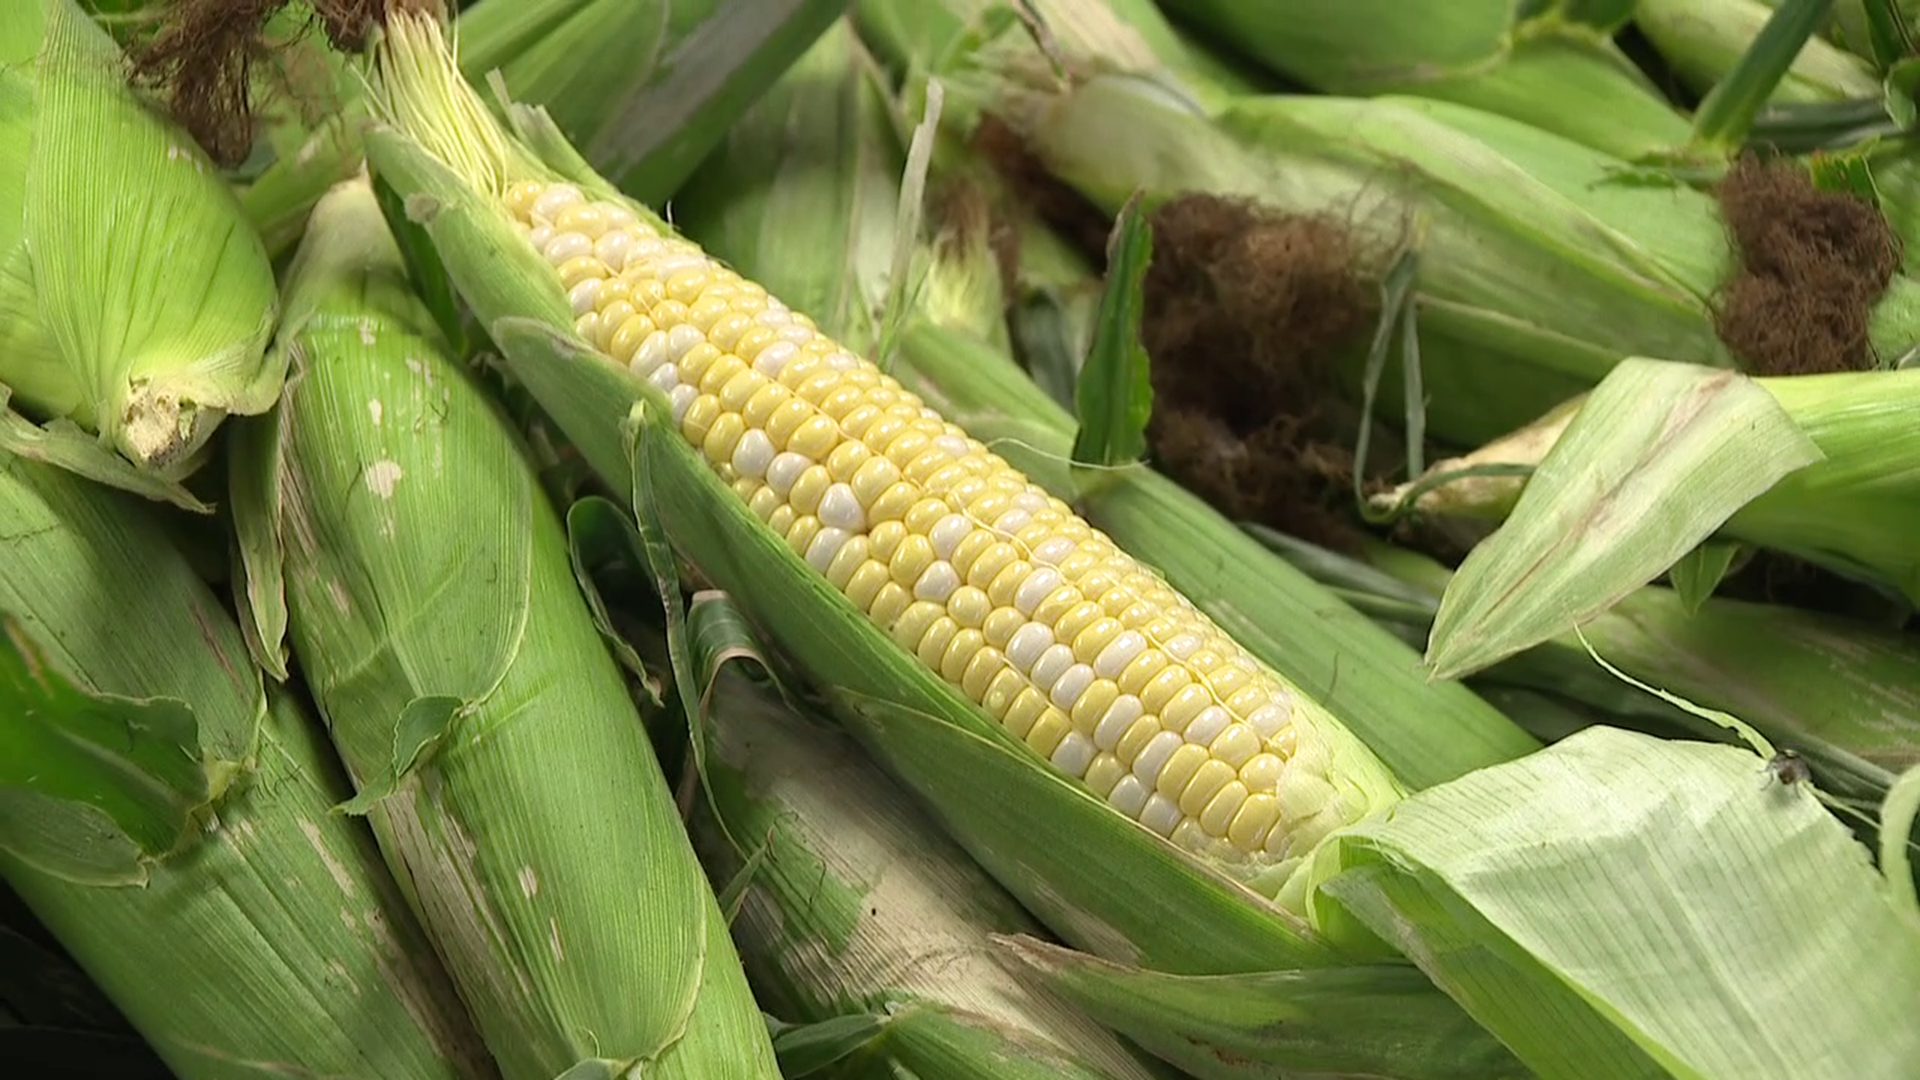 With warm temperatures and hardly any rain this month, one farmer in Union County says it's been a challenging year to grow sweet corn.